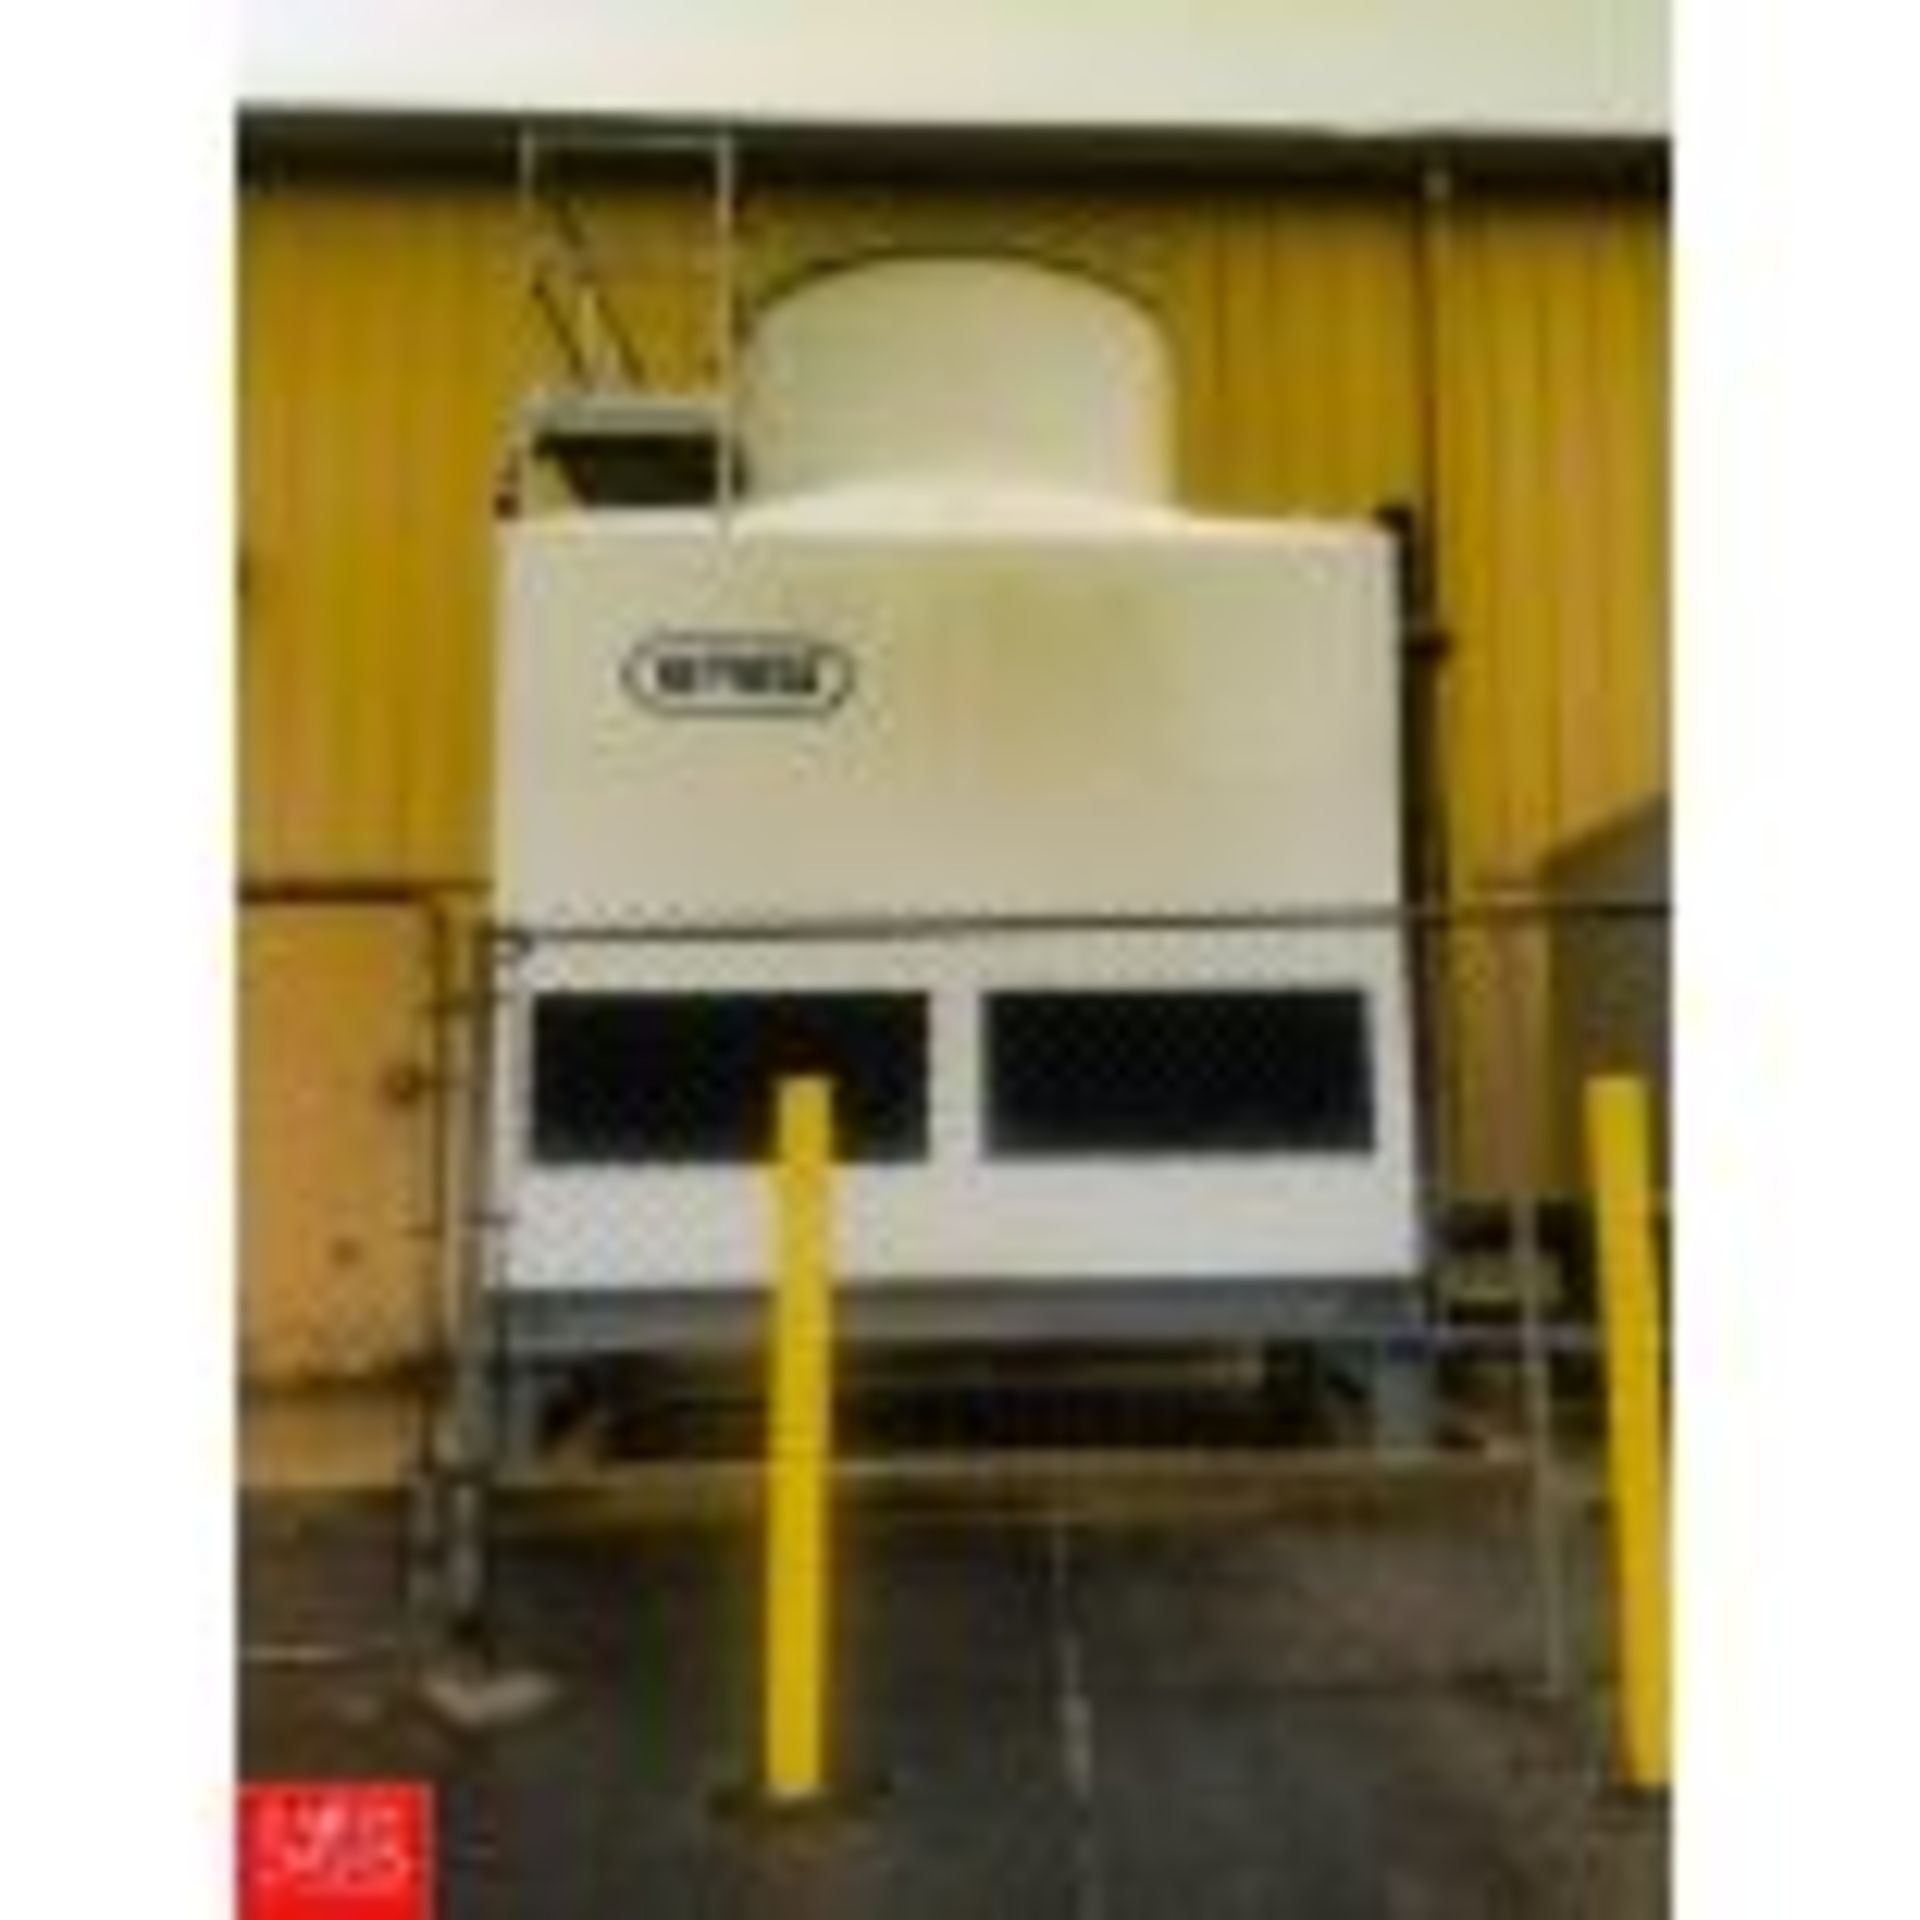 Reymsa 254.4 Ton Capacity Cooling Tower, Model: RTU-810115-A, S/N: M48M3R1143G19434844 with (3) - Image 2 of 2